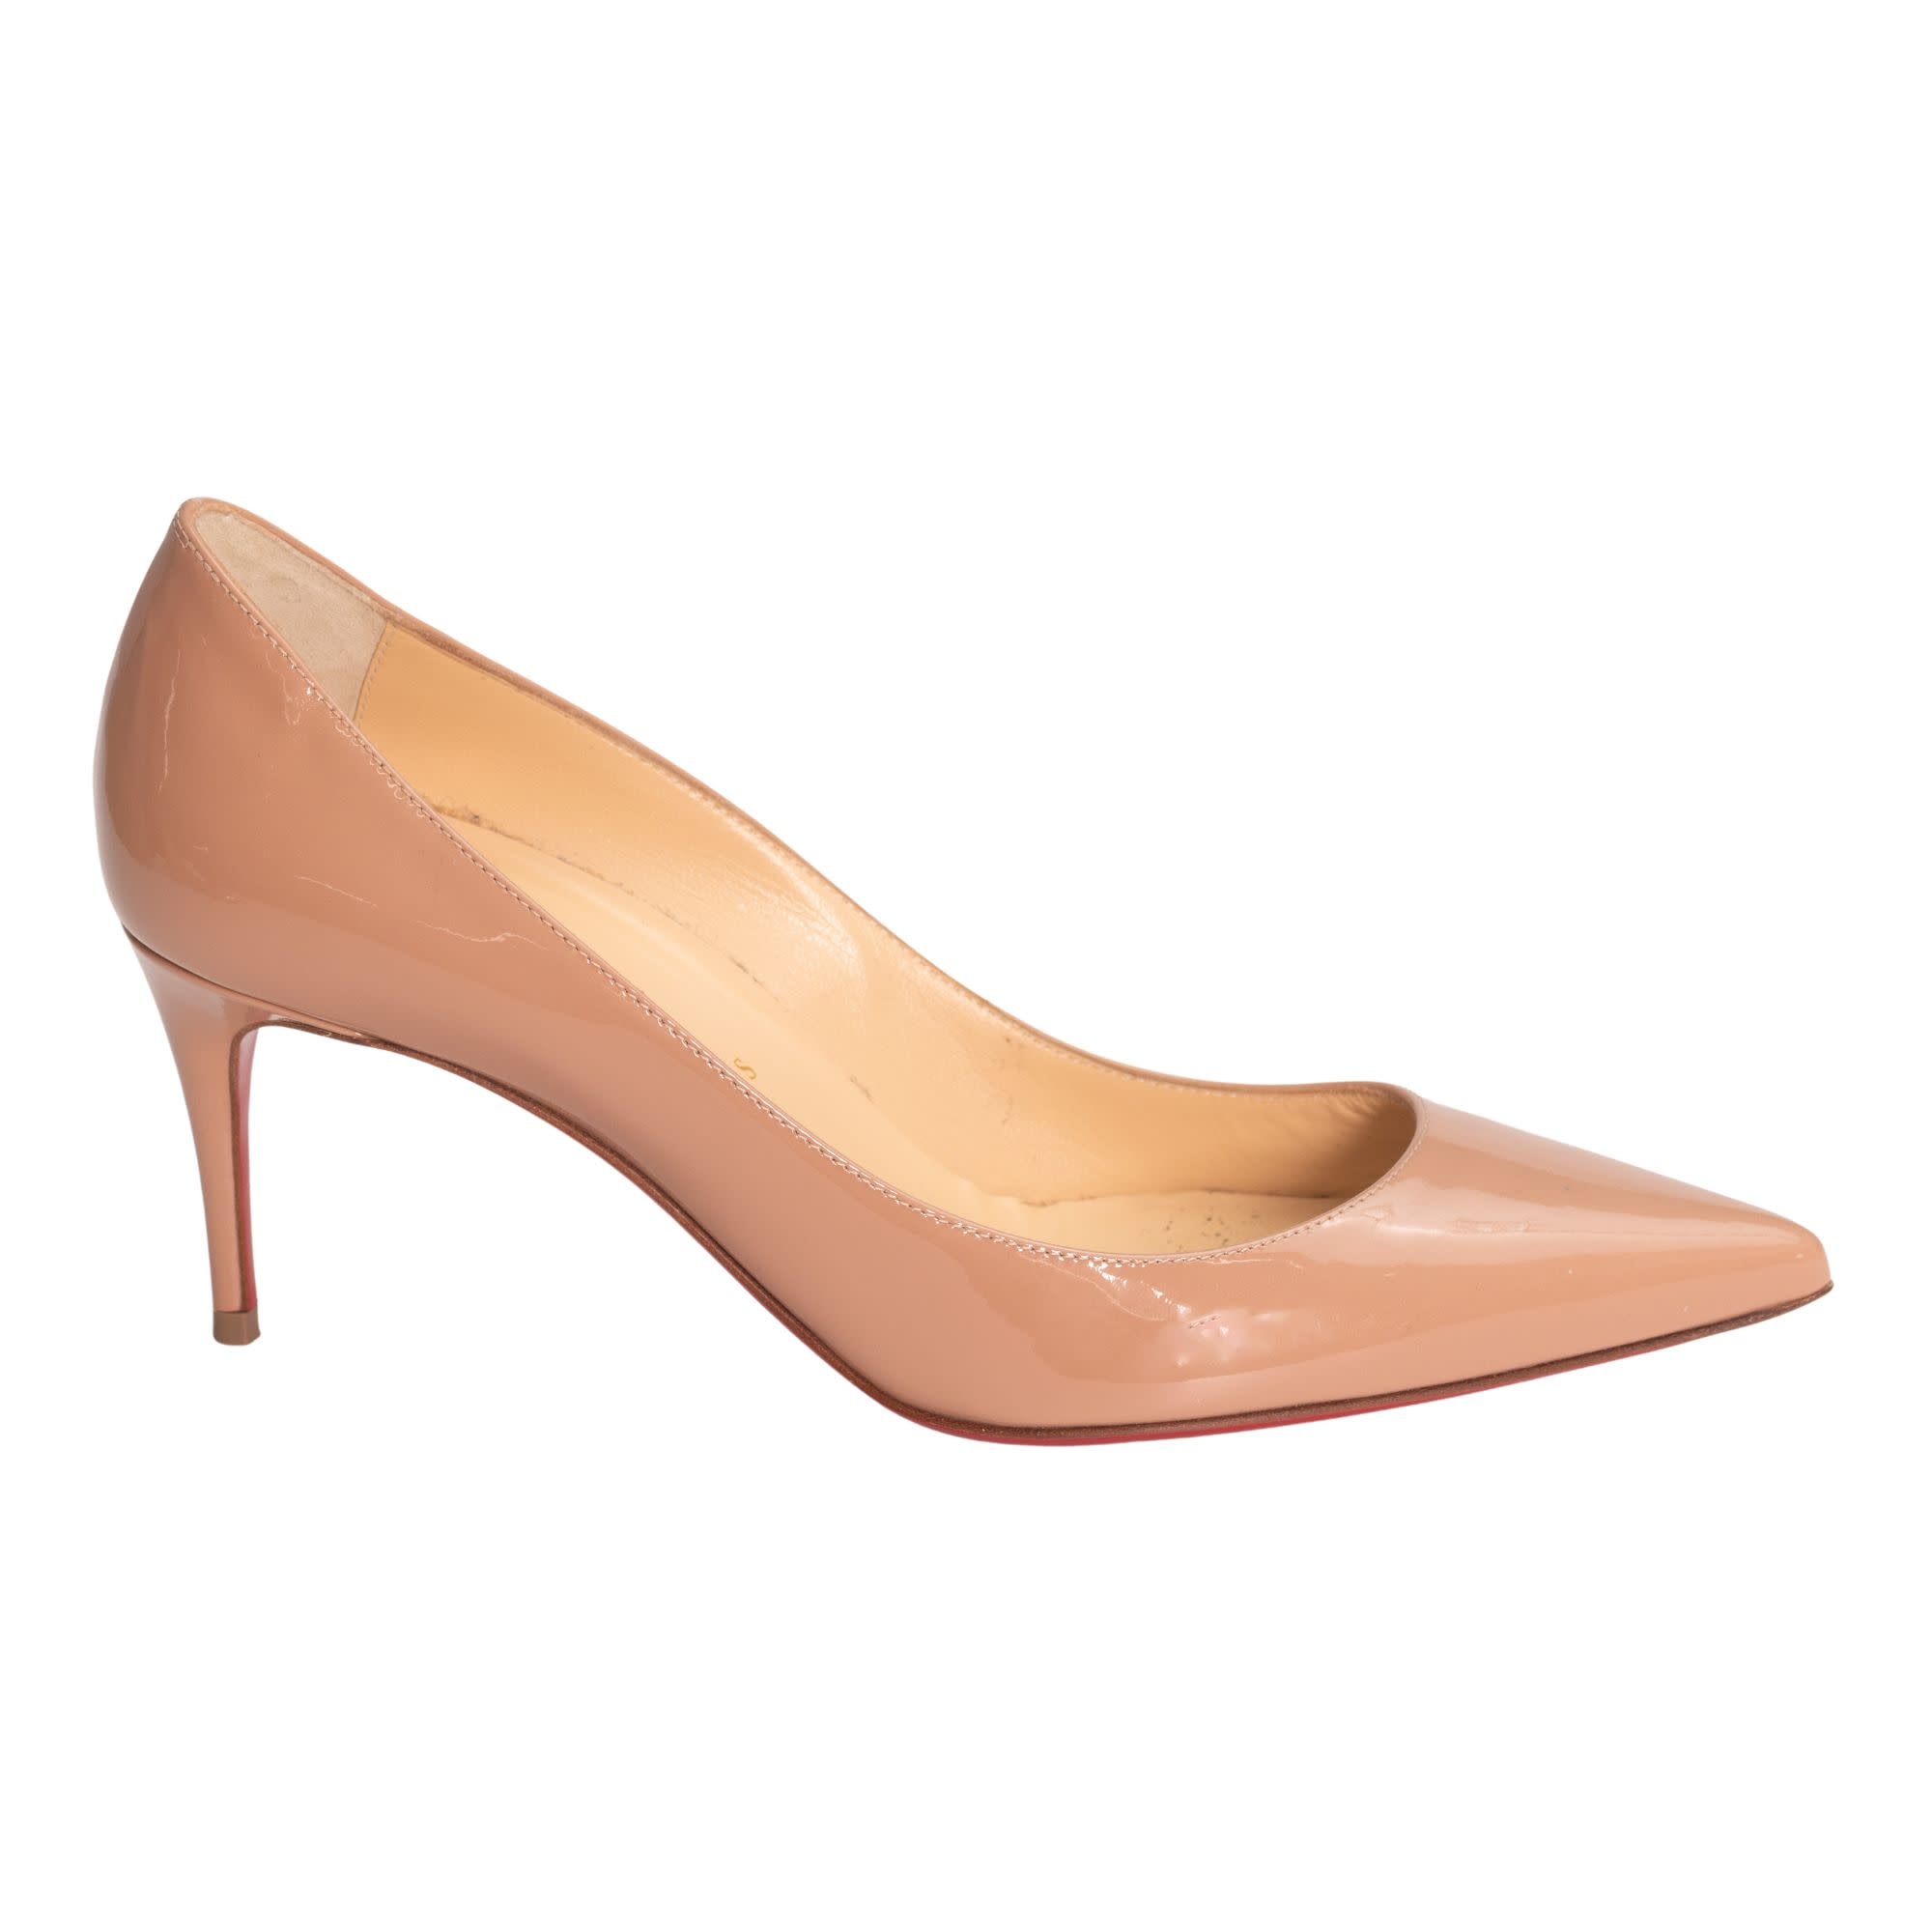 CHRISTIAN LOUBOUTIN BEIGE PATENT LEATHER PIGALLE POINTED TOE HEELS (EU 35.5)